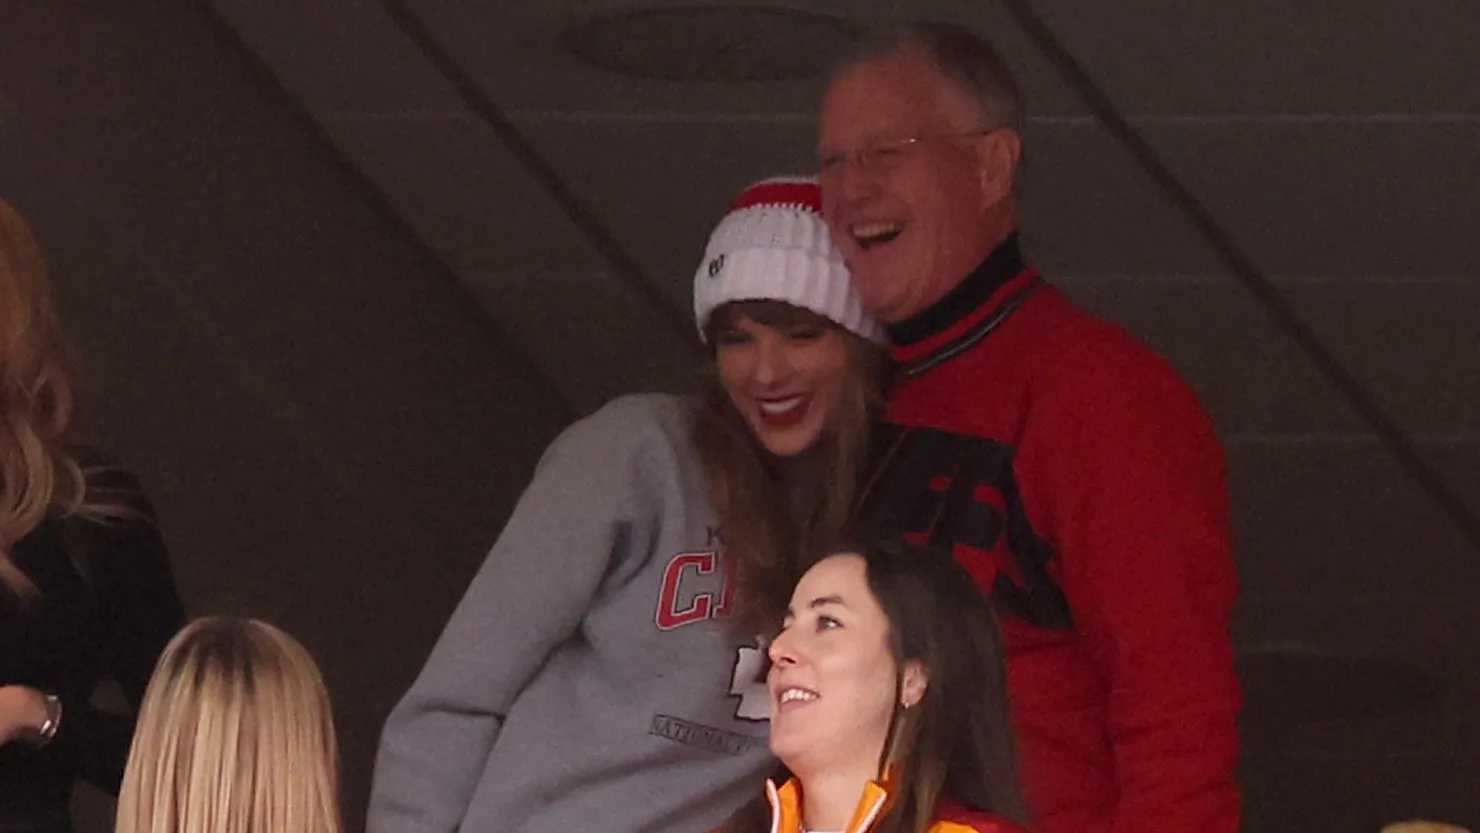 taylor-swift-trying-to-tell-his-father-scott-that-shes-still-his-little-girl-amid-travis-kelce-engagement-rumors